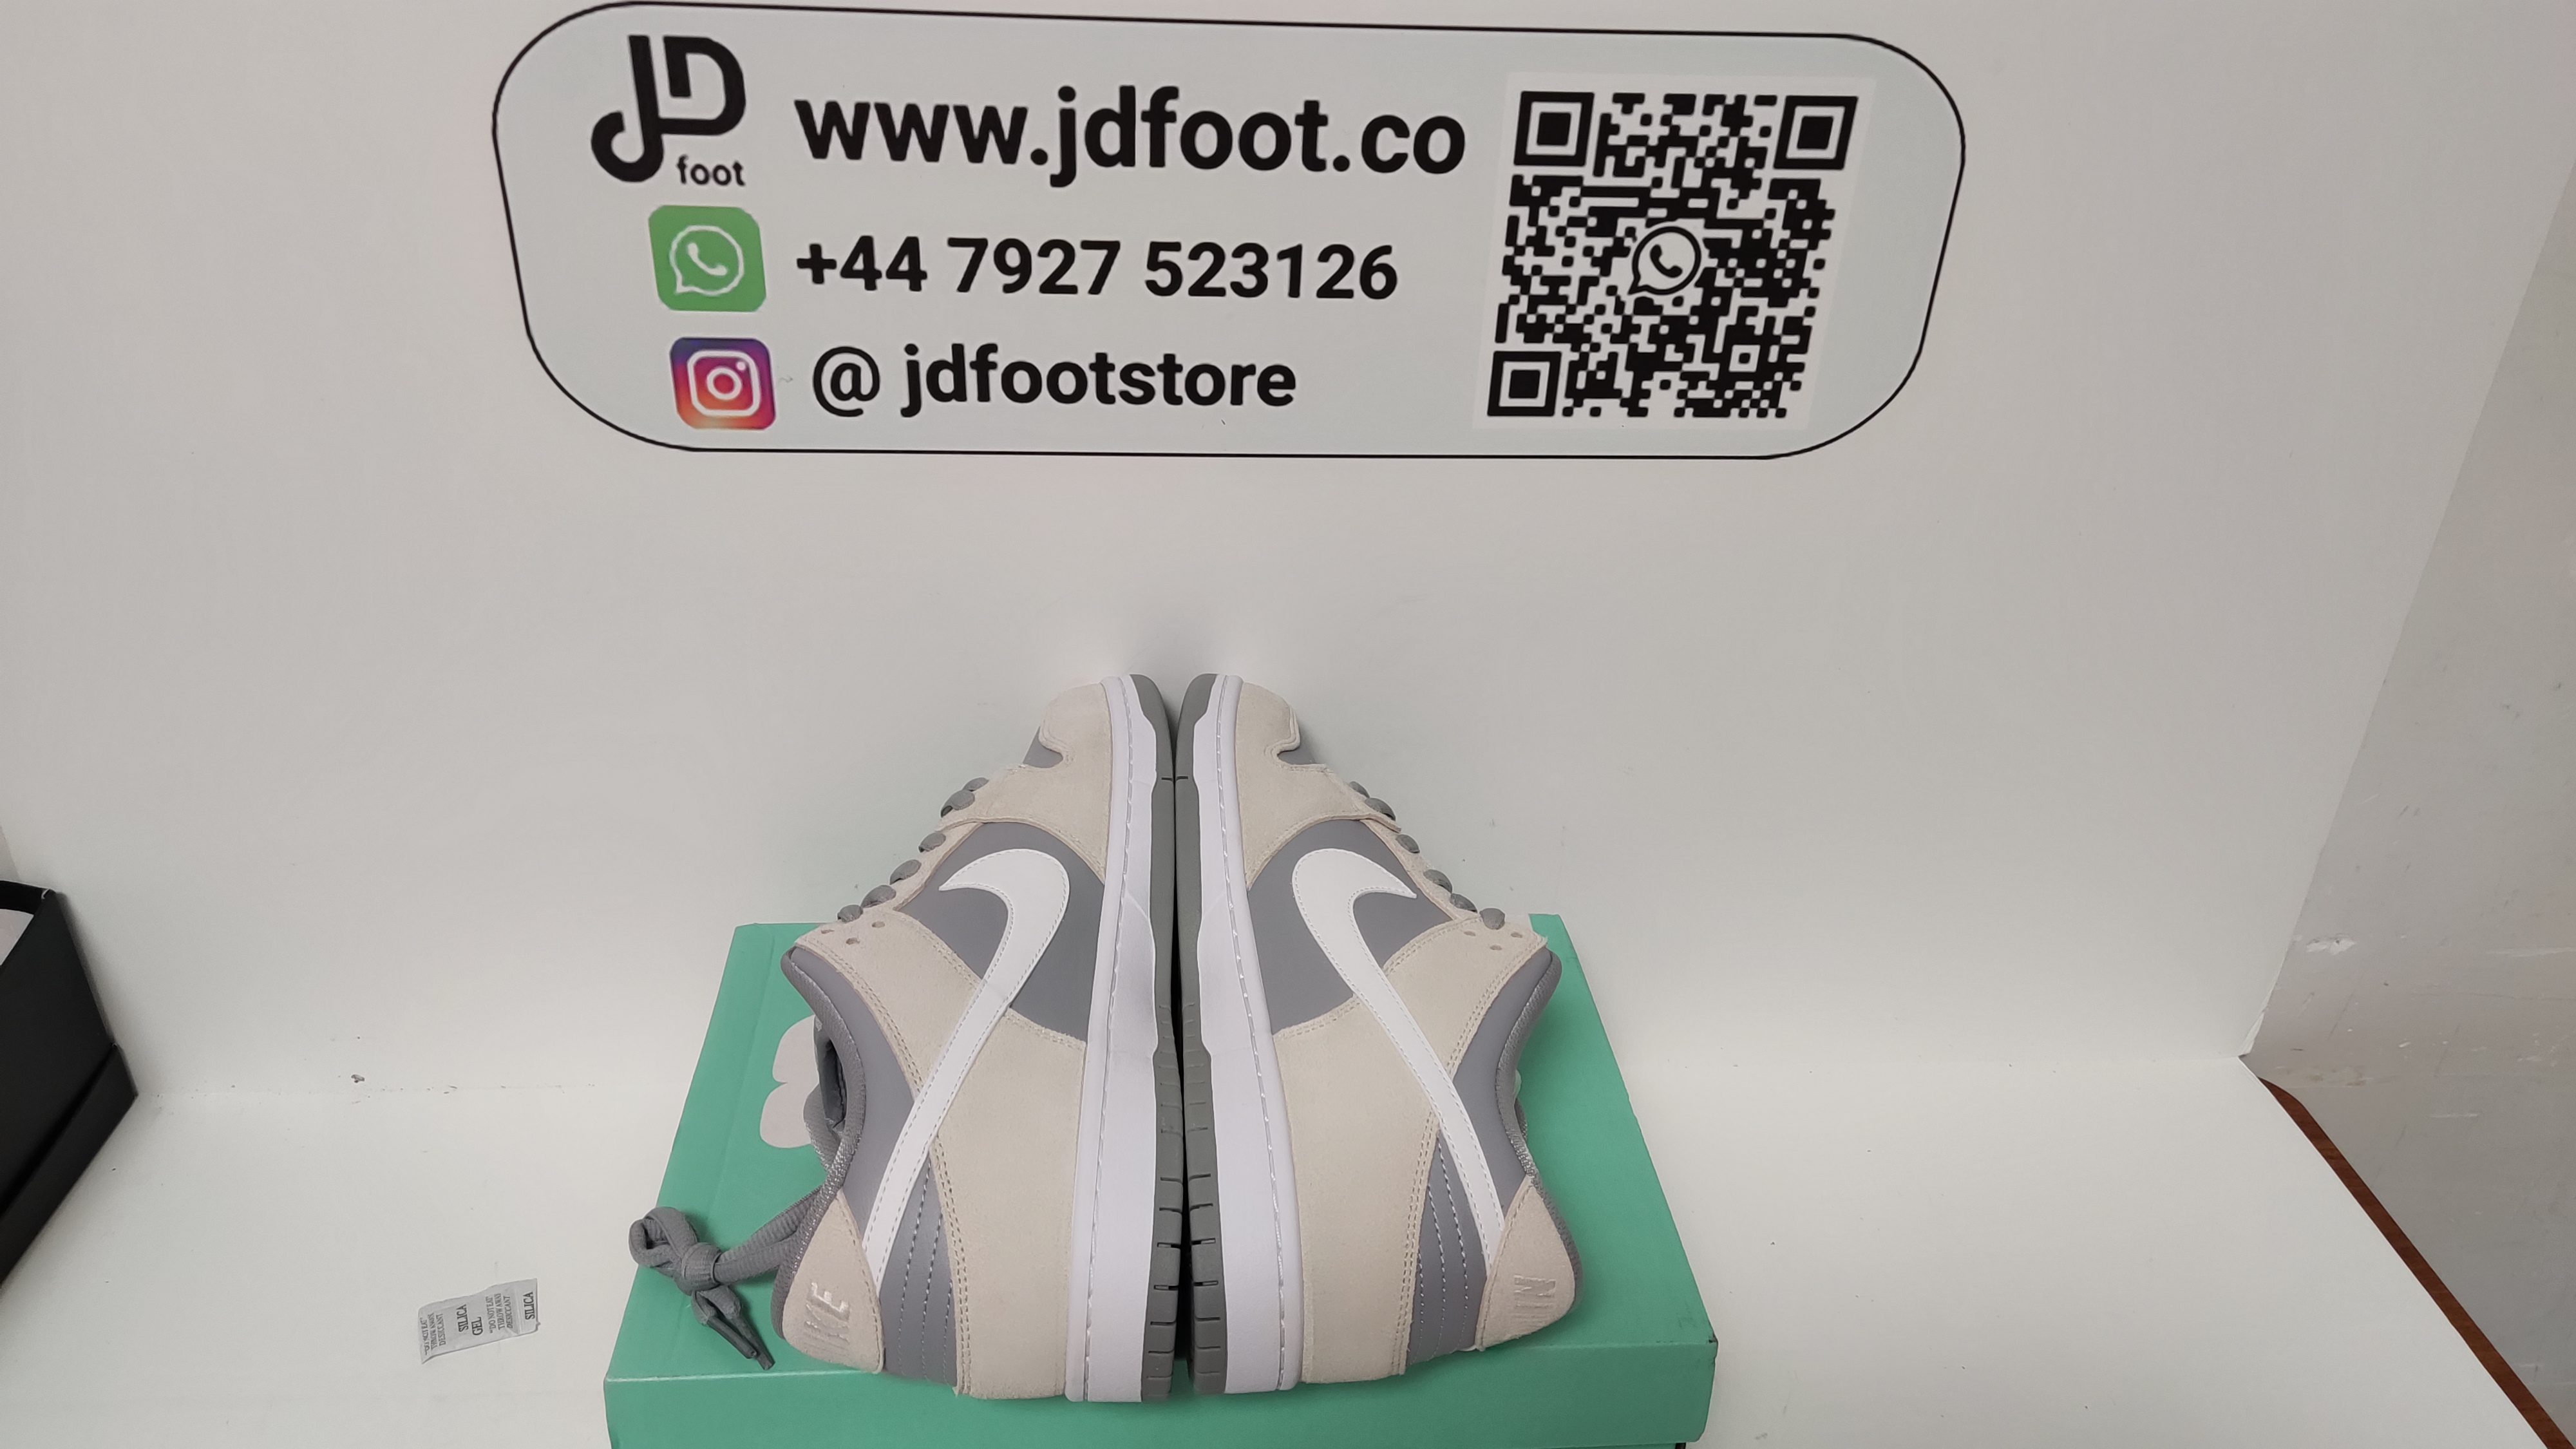 QC Picture Replica Dunk Low Summit White Wolf Grey From Jdfoot